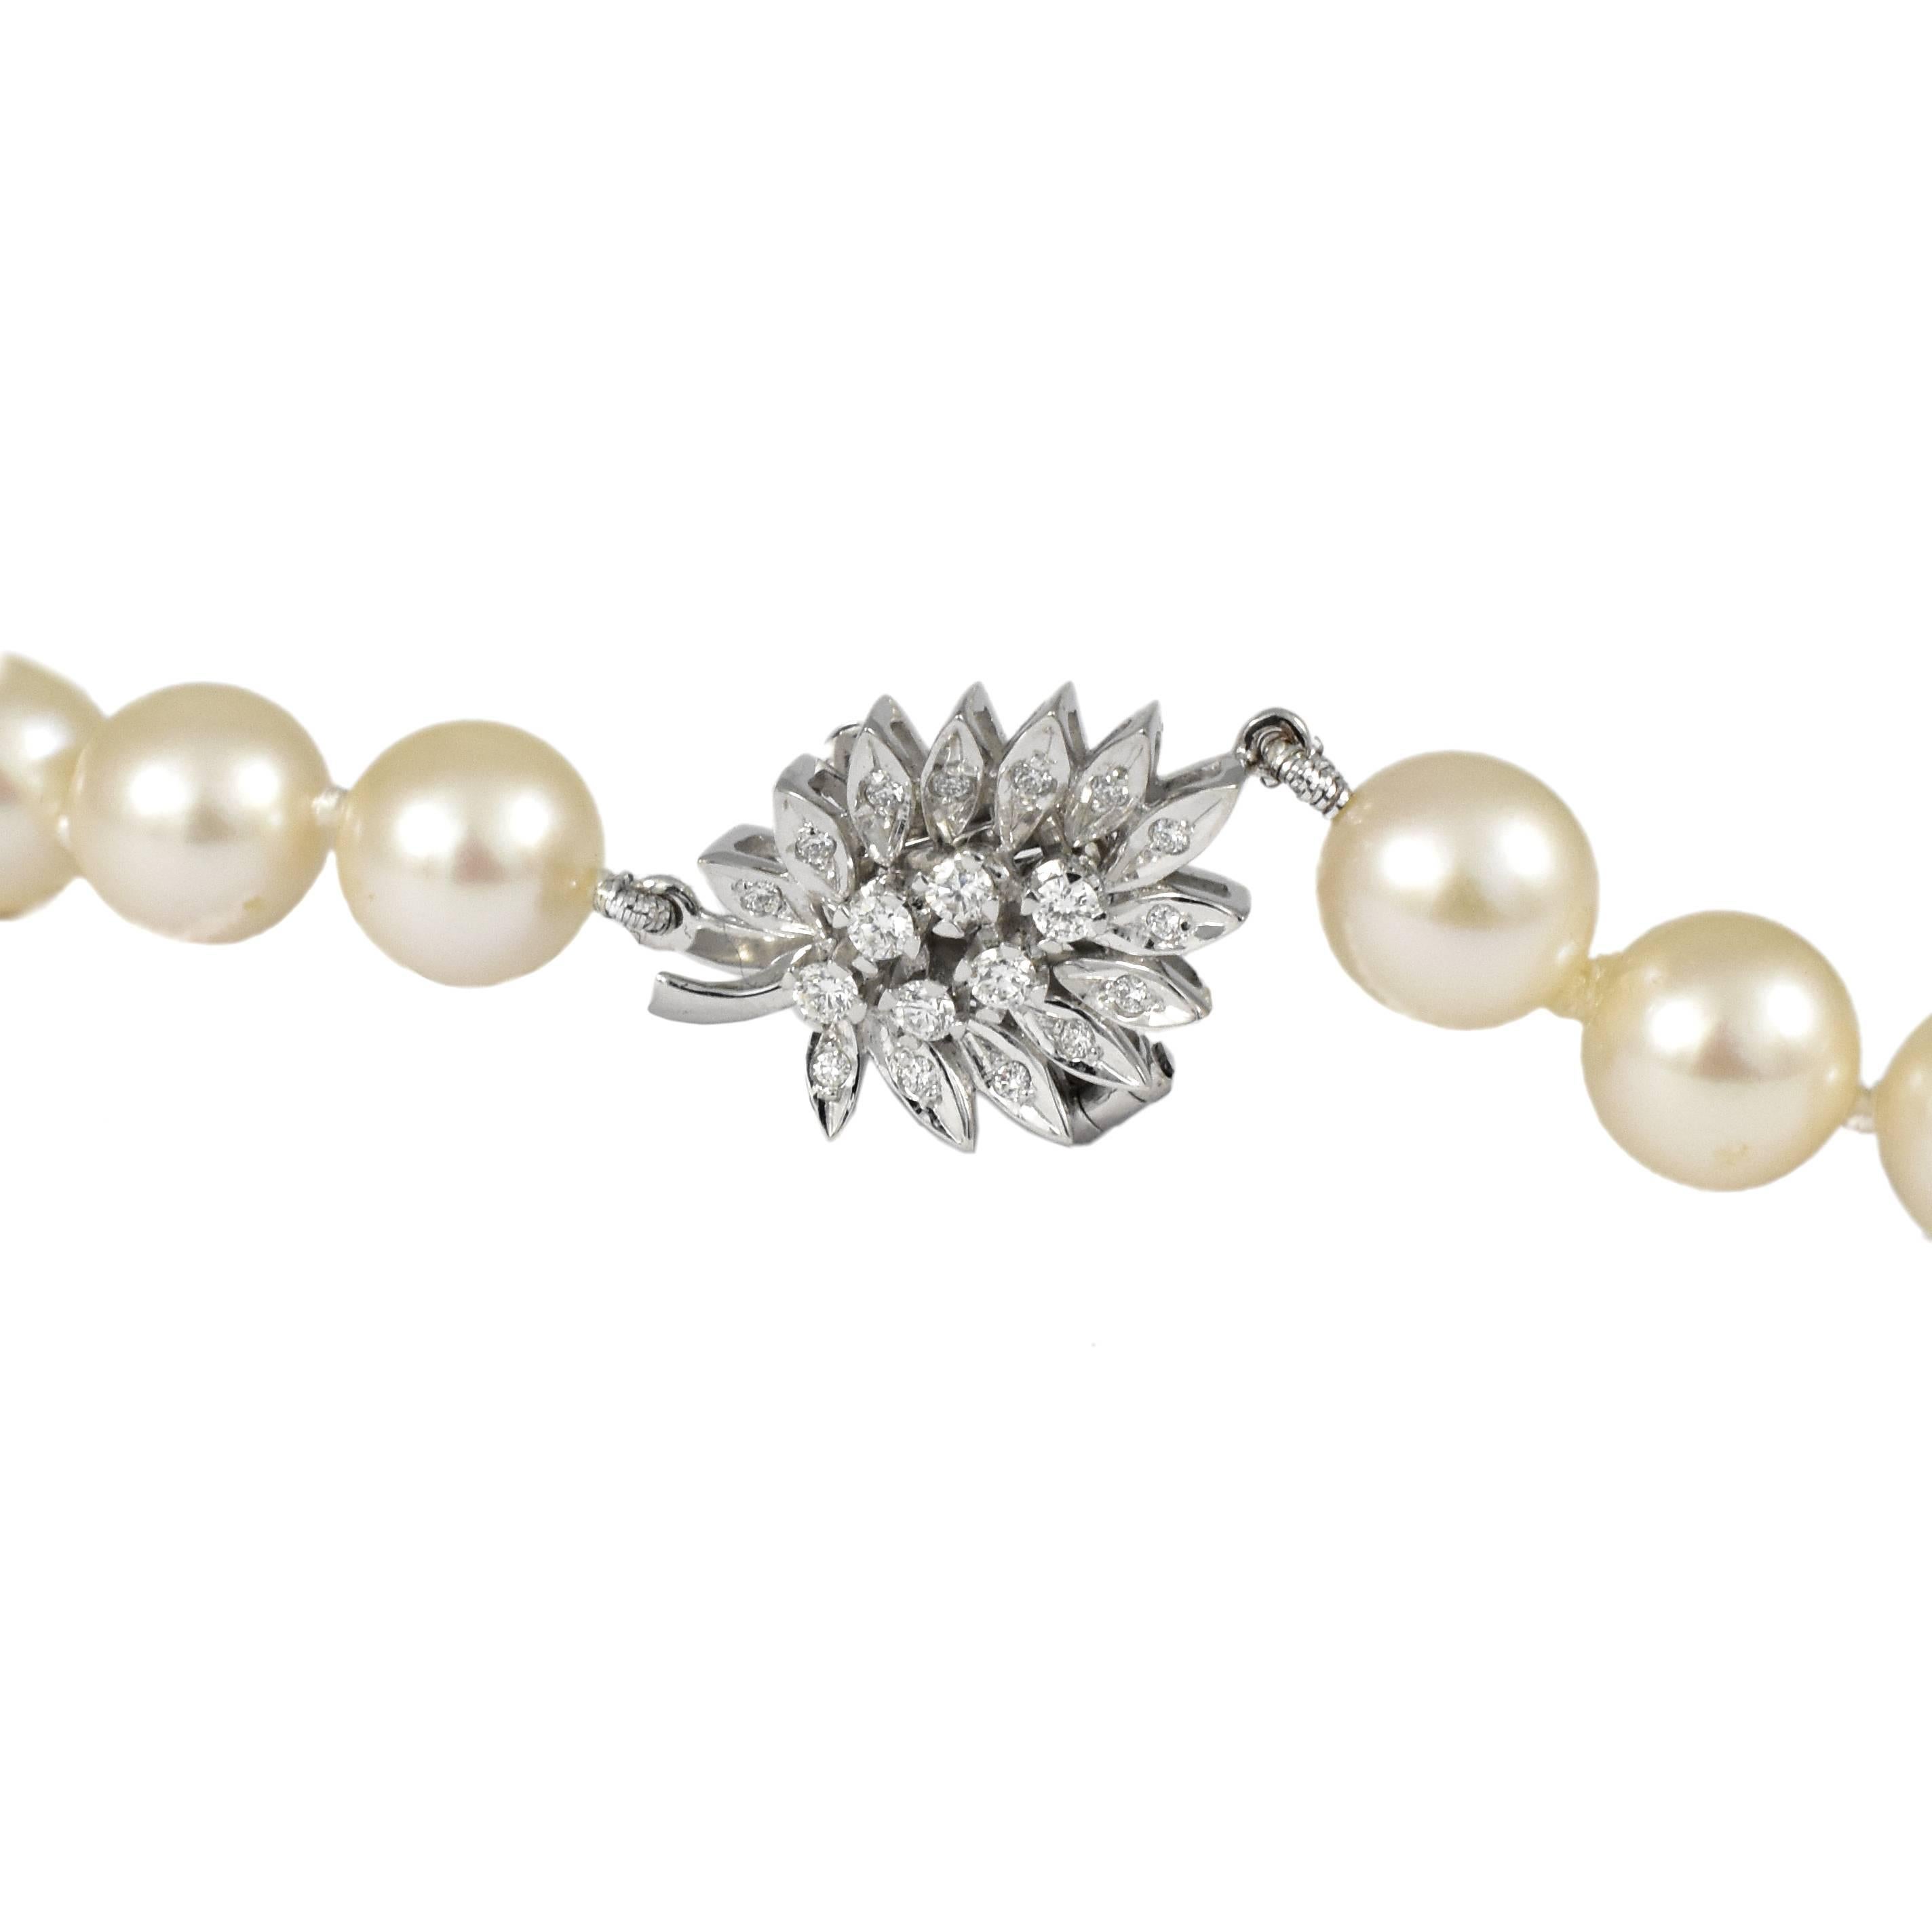 A Pearl necklace with a handmade Diamond White Gold Leaf design clasp. The solid 18 karat gold clasp is handmade in detail with a safety catch and set with diamonds. The pearls are single strand 6mm saltwater white, Princess length 20 inch, 50cm